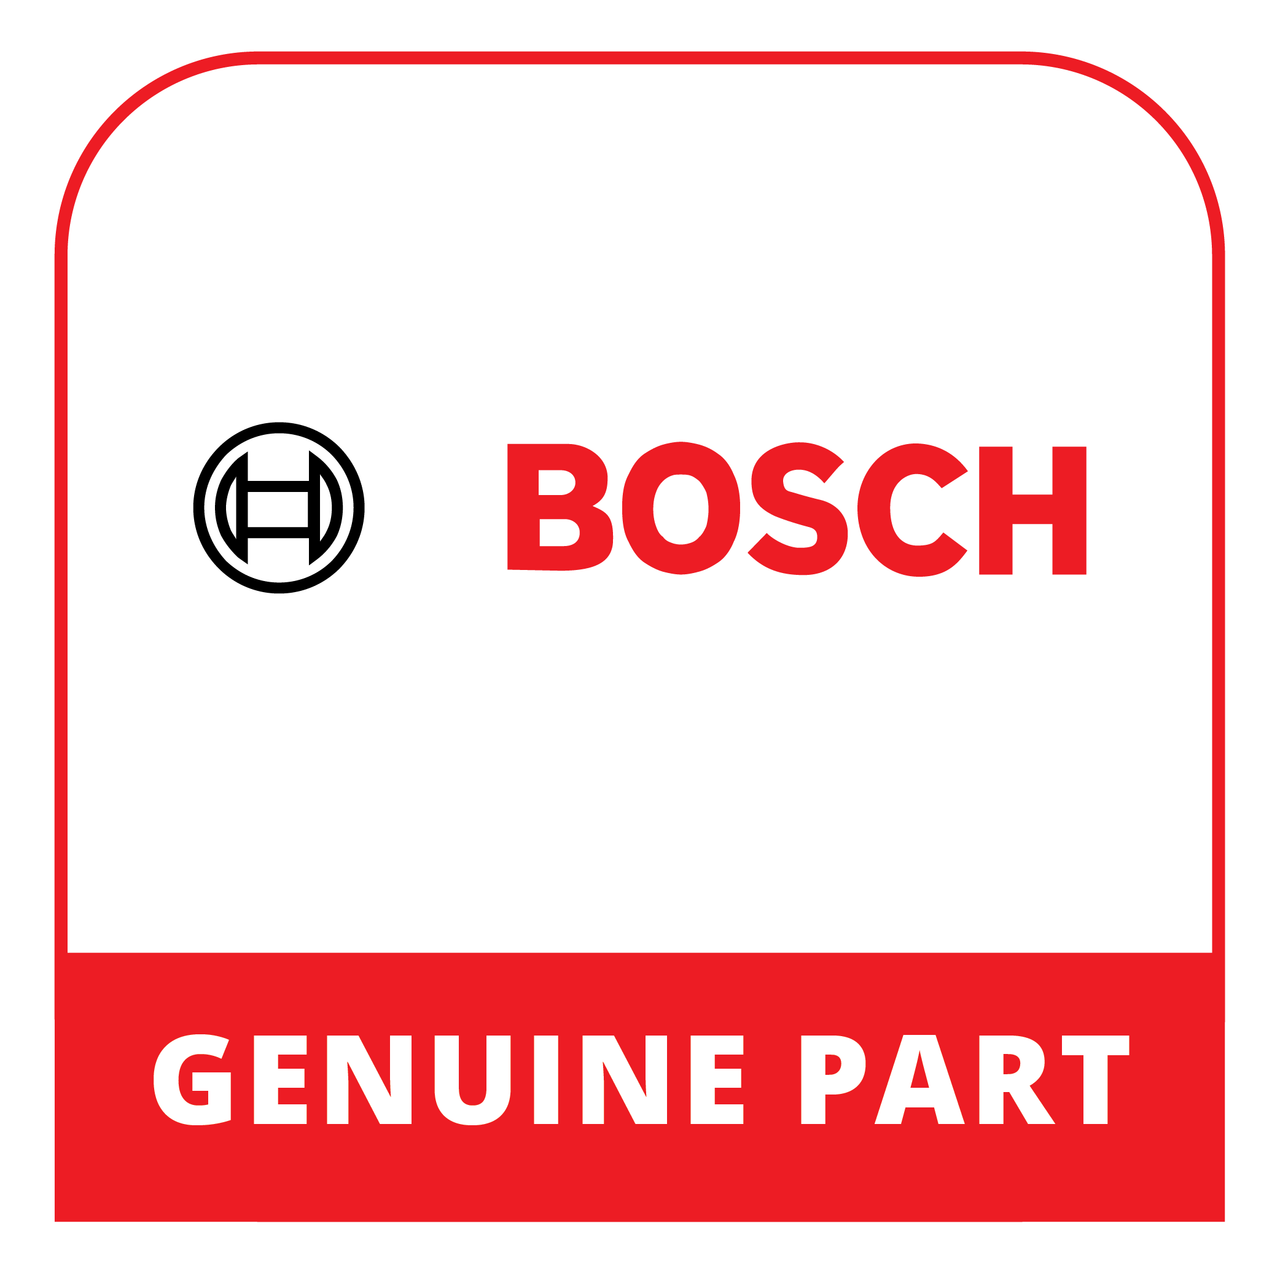 Bosch (Thermador) 20005755 - Insulating Part - Genuine Bosch (Thermador) Part